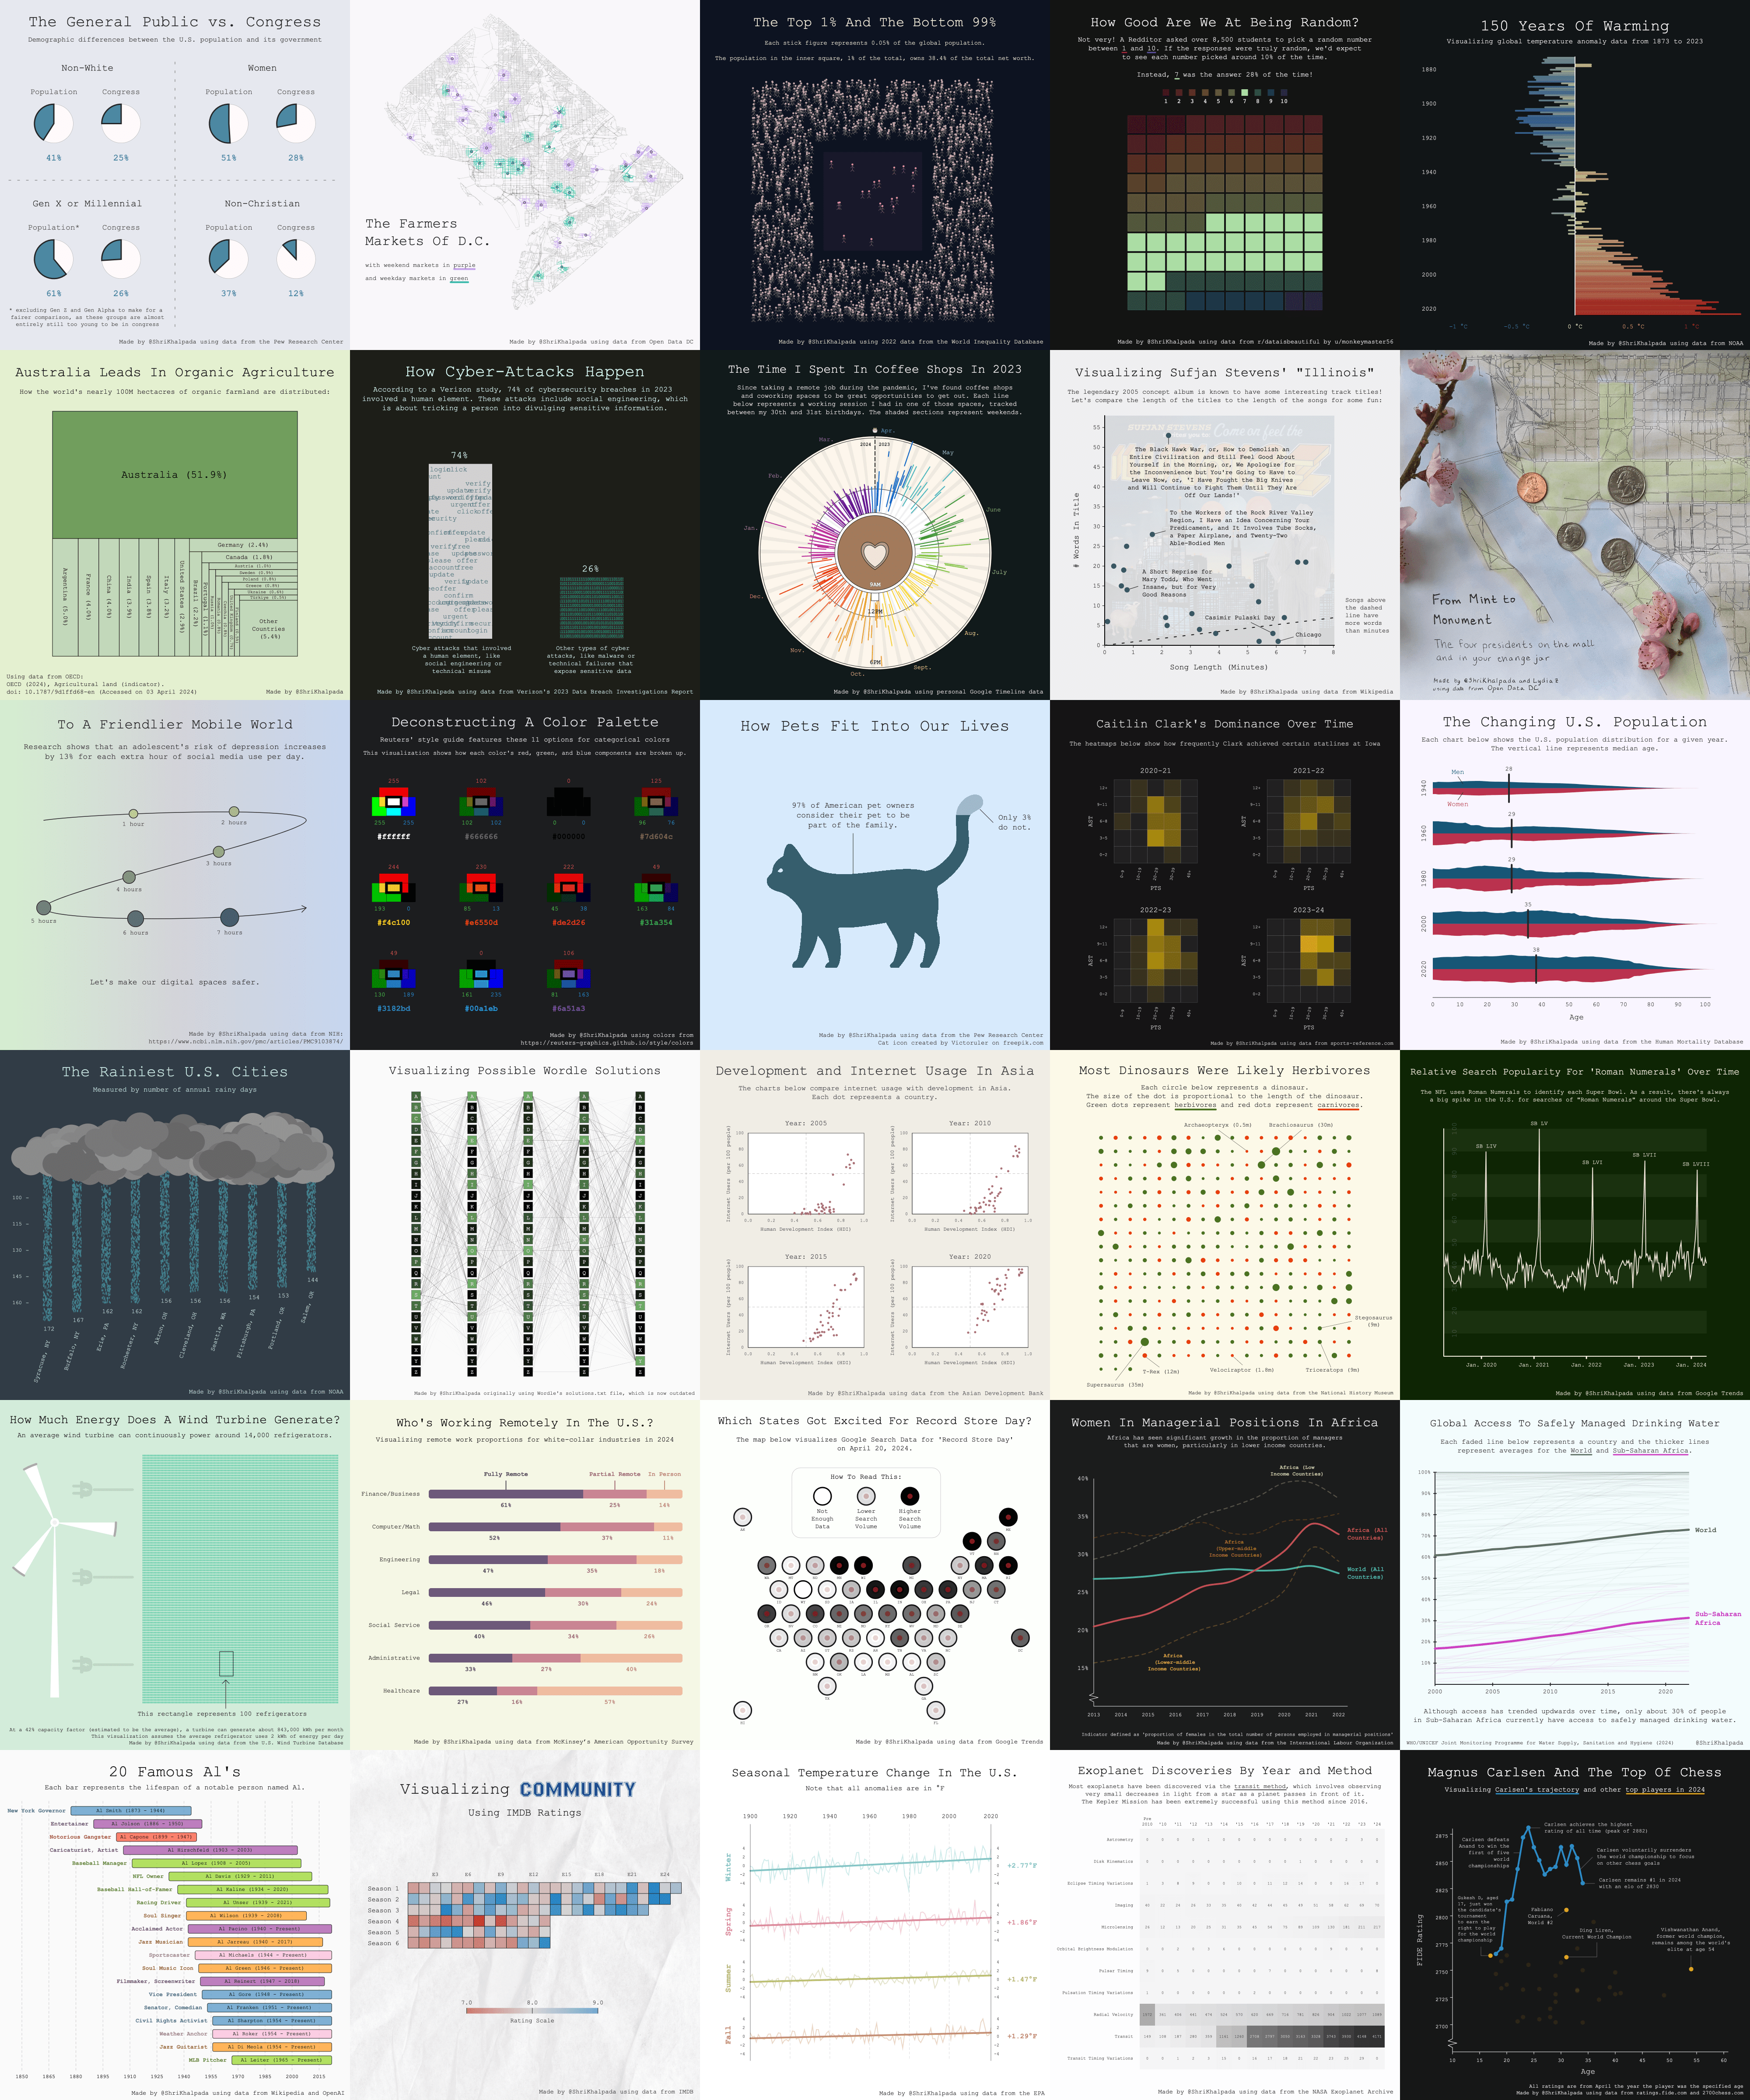 A grid of 30 visualizations created for the #30DayChartChallenge.